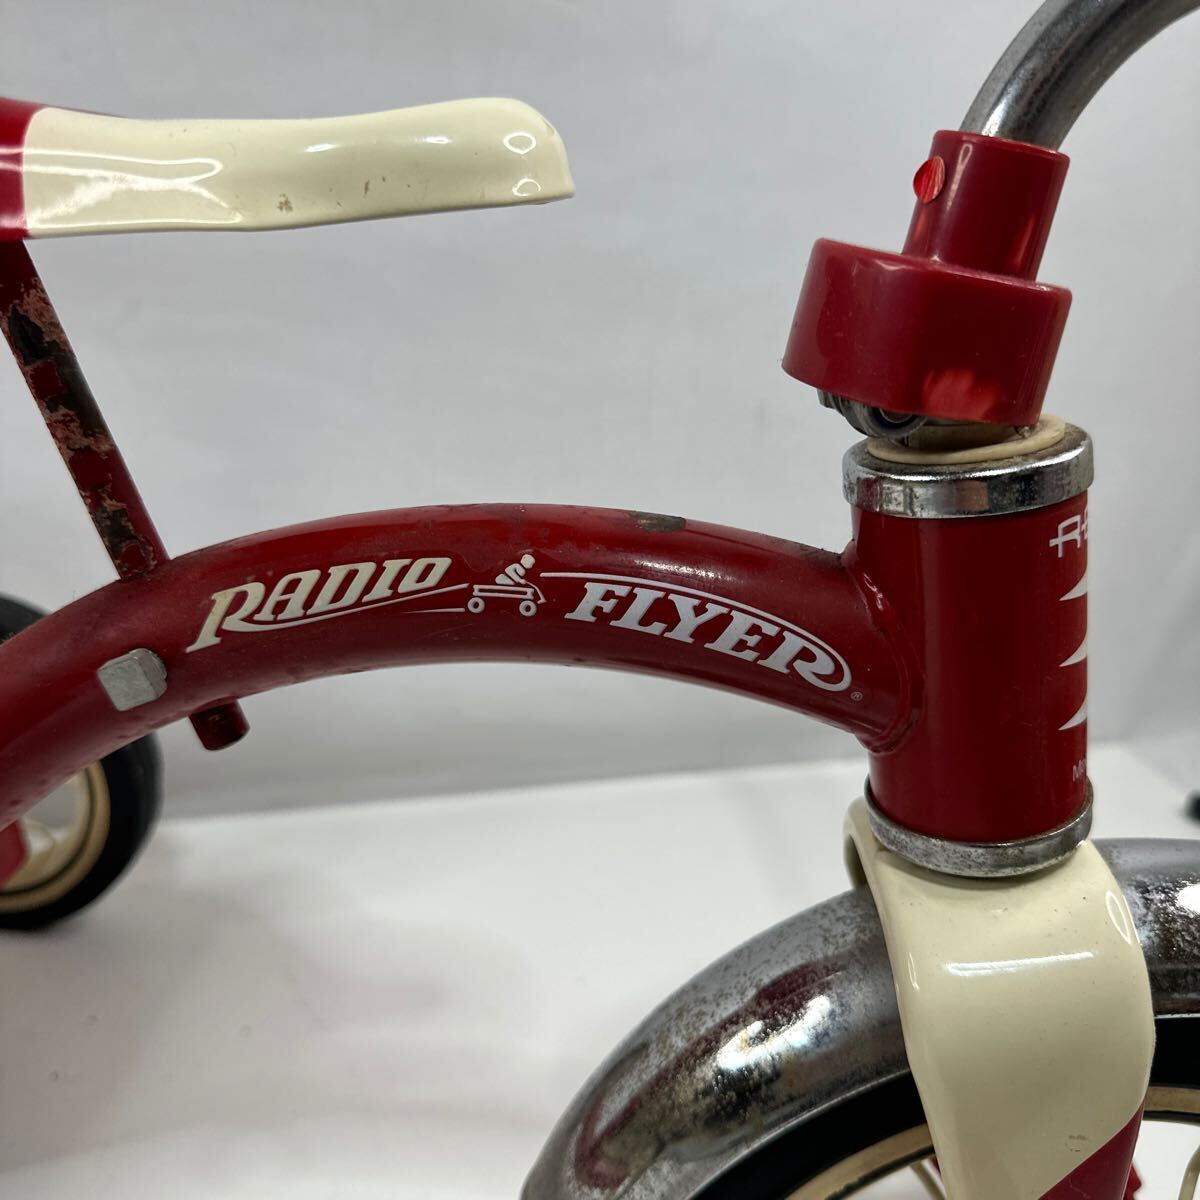 [ working properly goods ] radio Flyer tricycle child 2 -years old retro toy Vintage RADIO FLYER (1057)